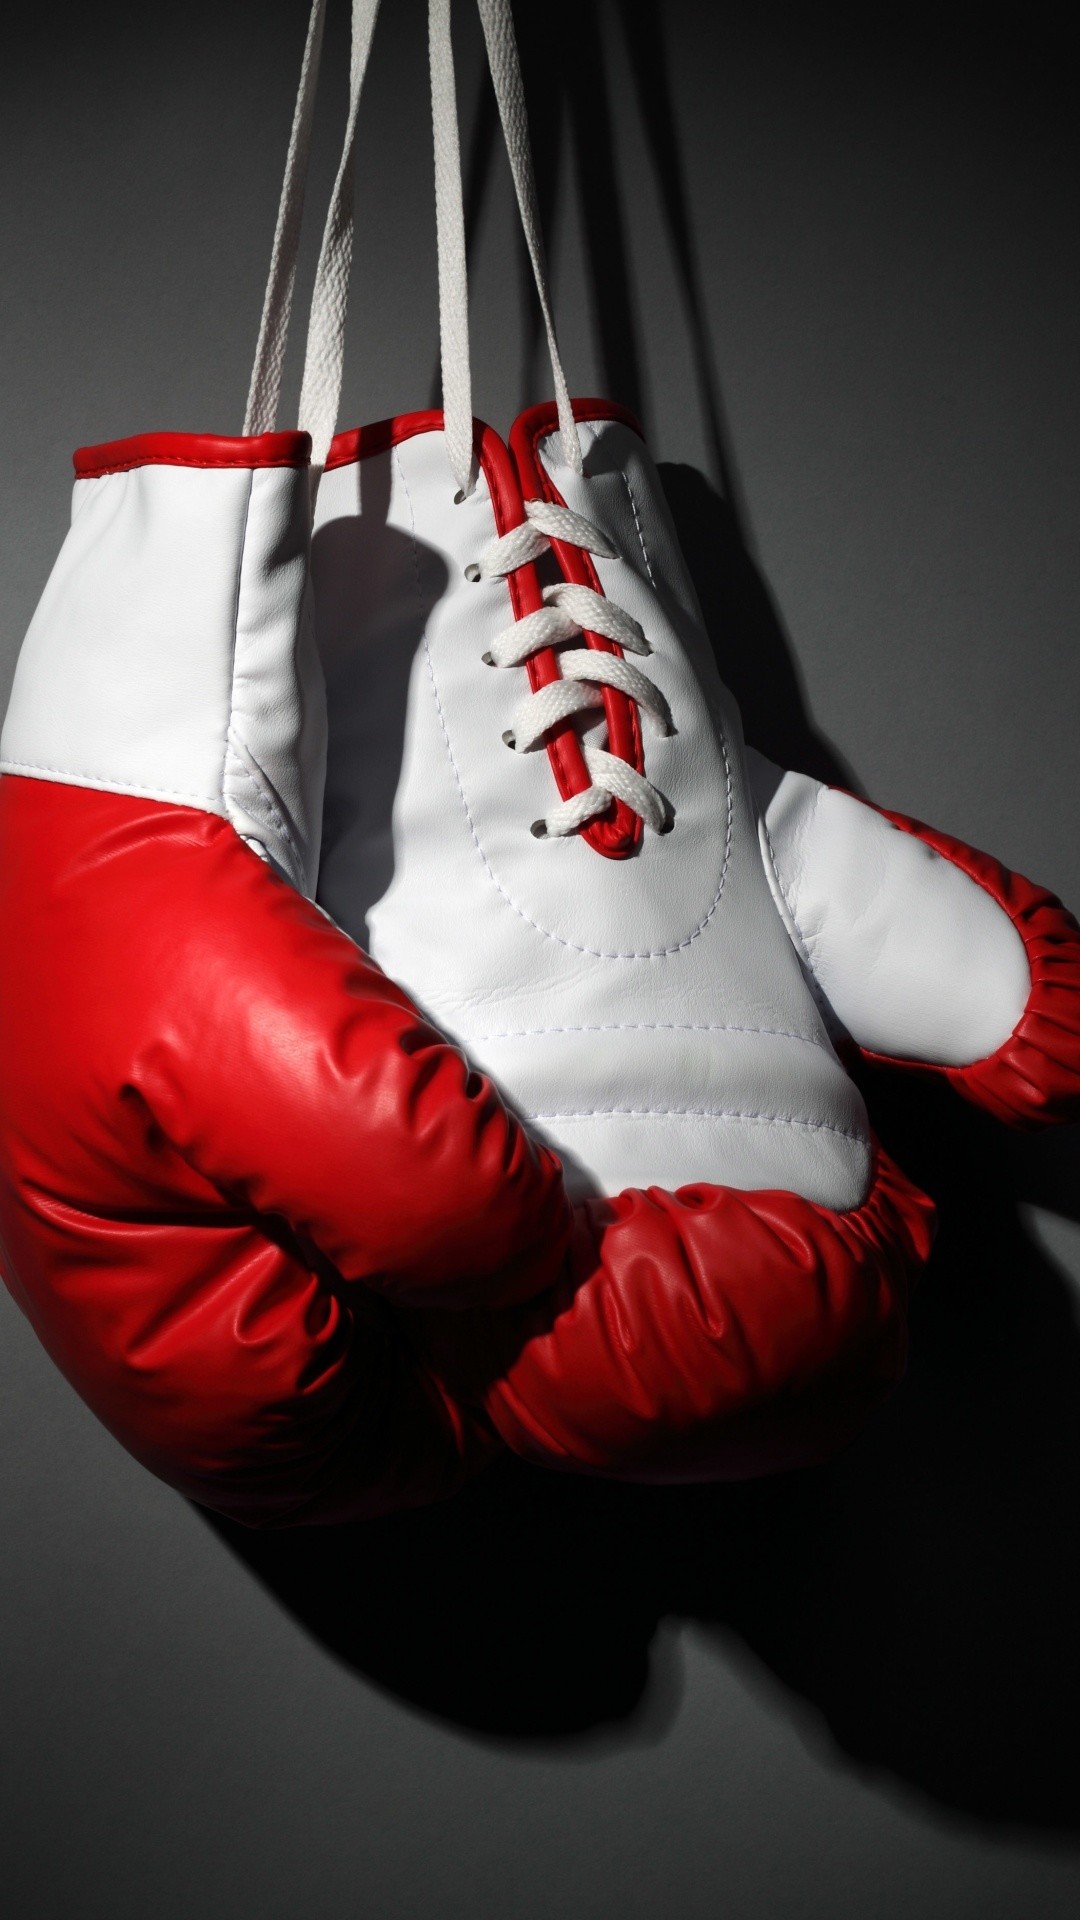 1080x1920 Red And White Boxing Gloves